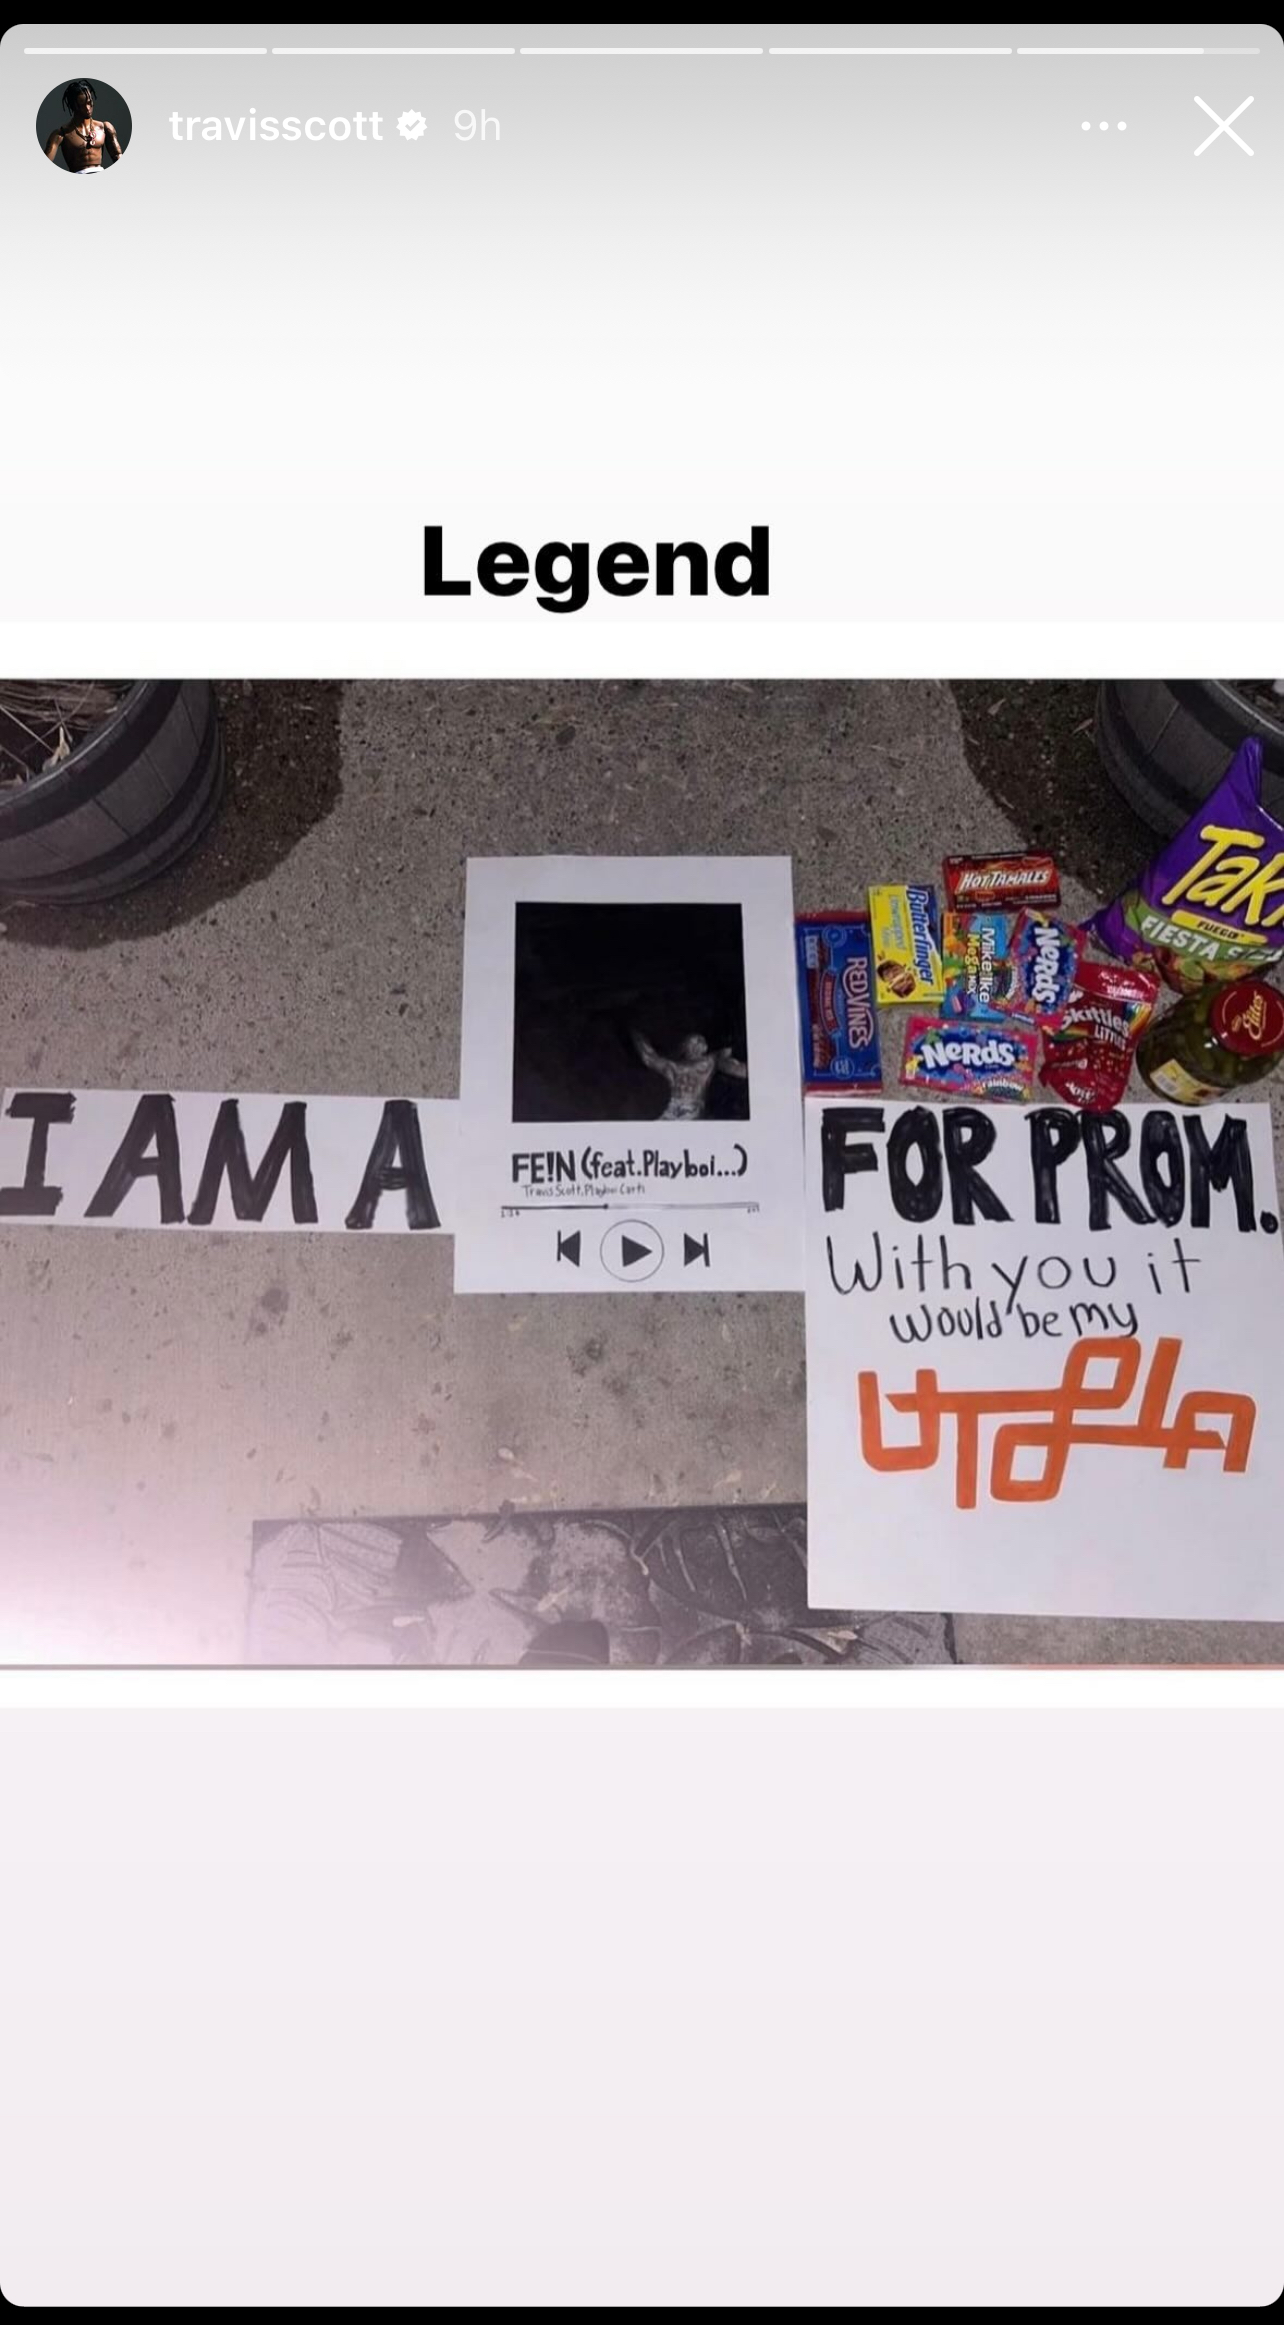 Travis Scott&#x27;s Instagram story with a promposal and snacks